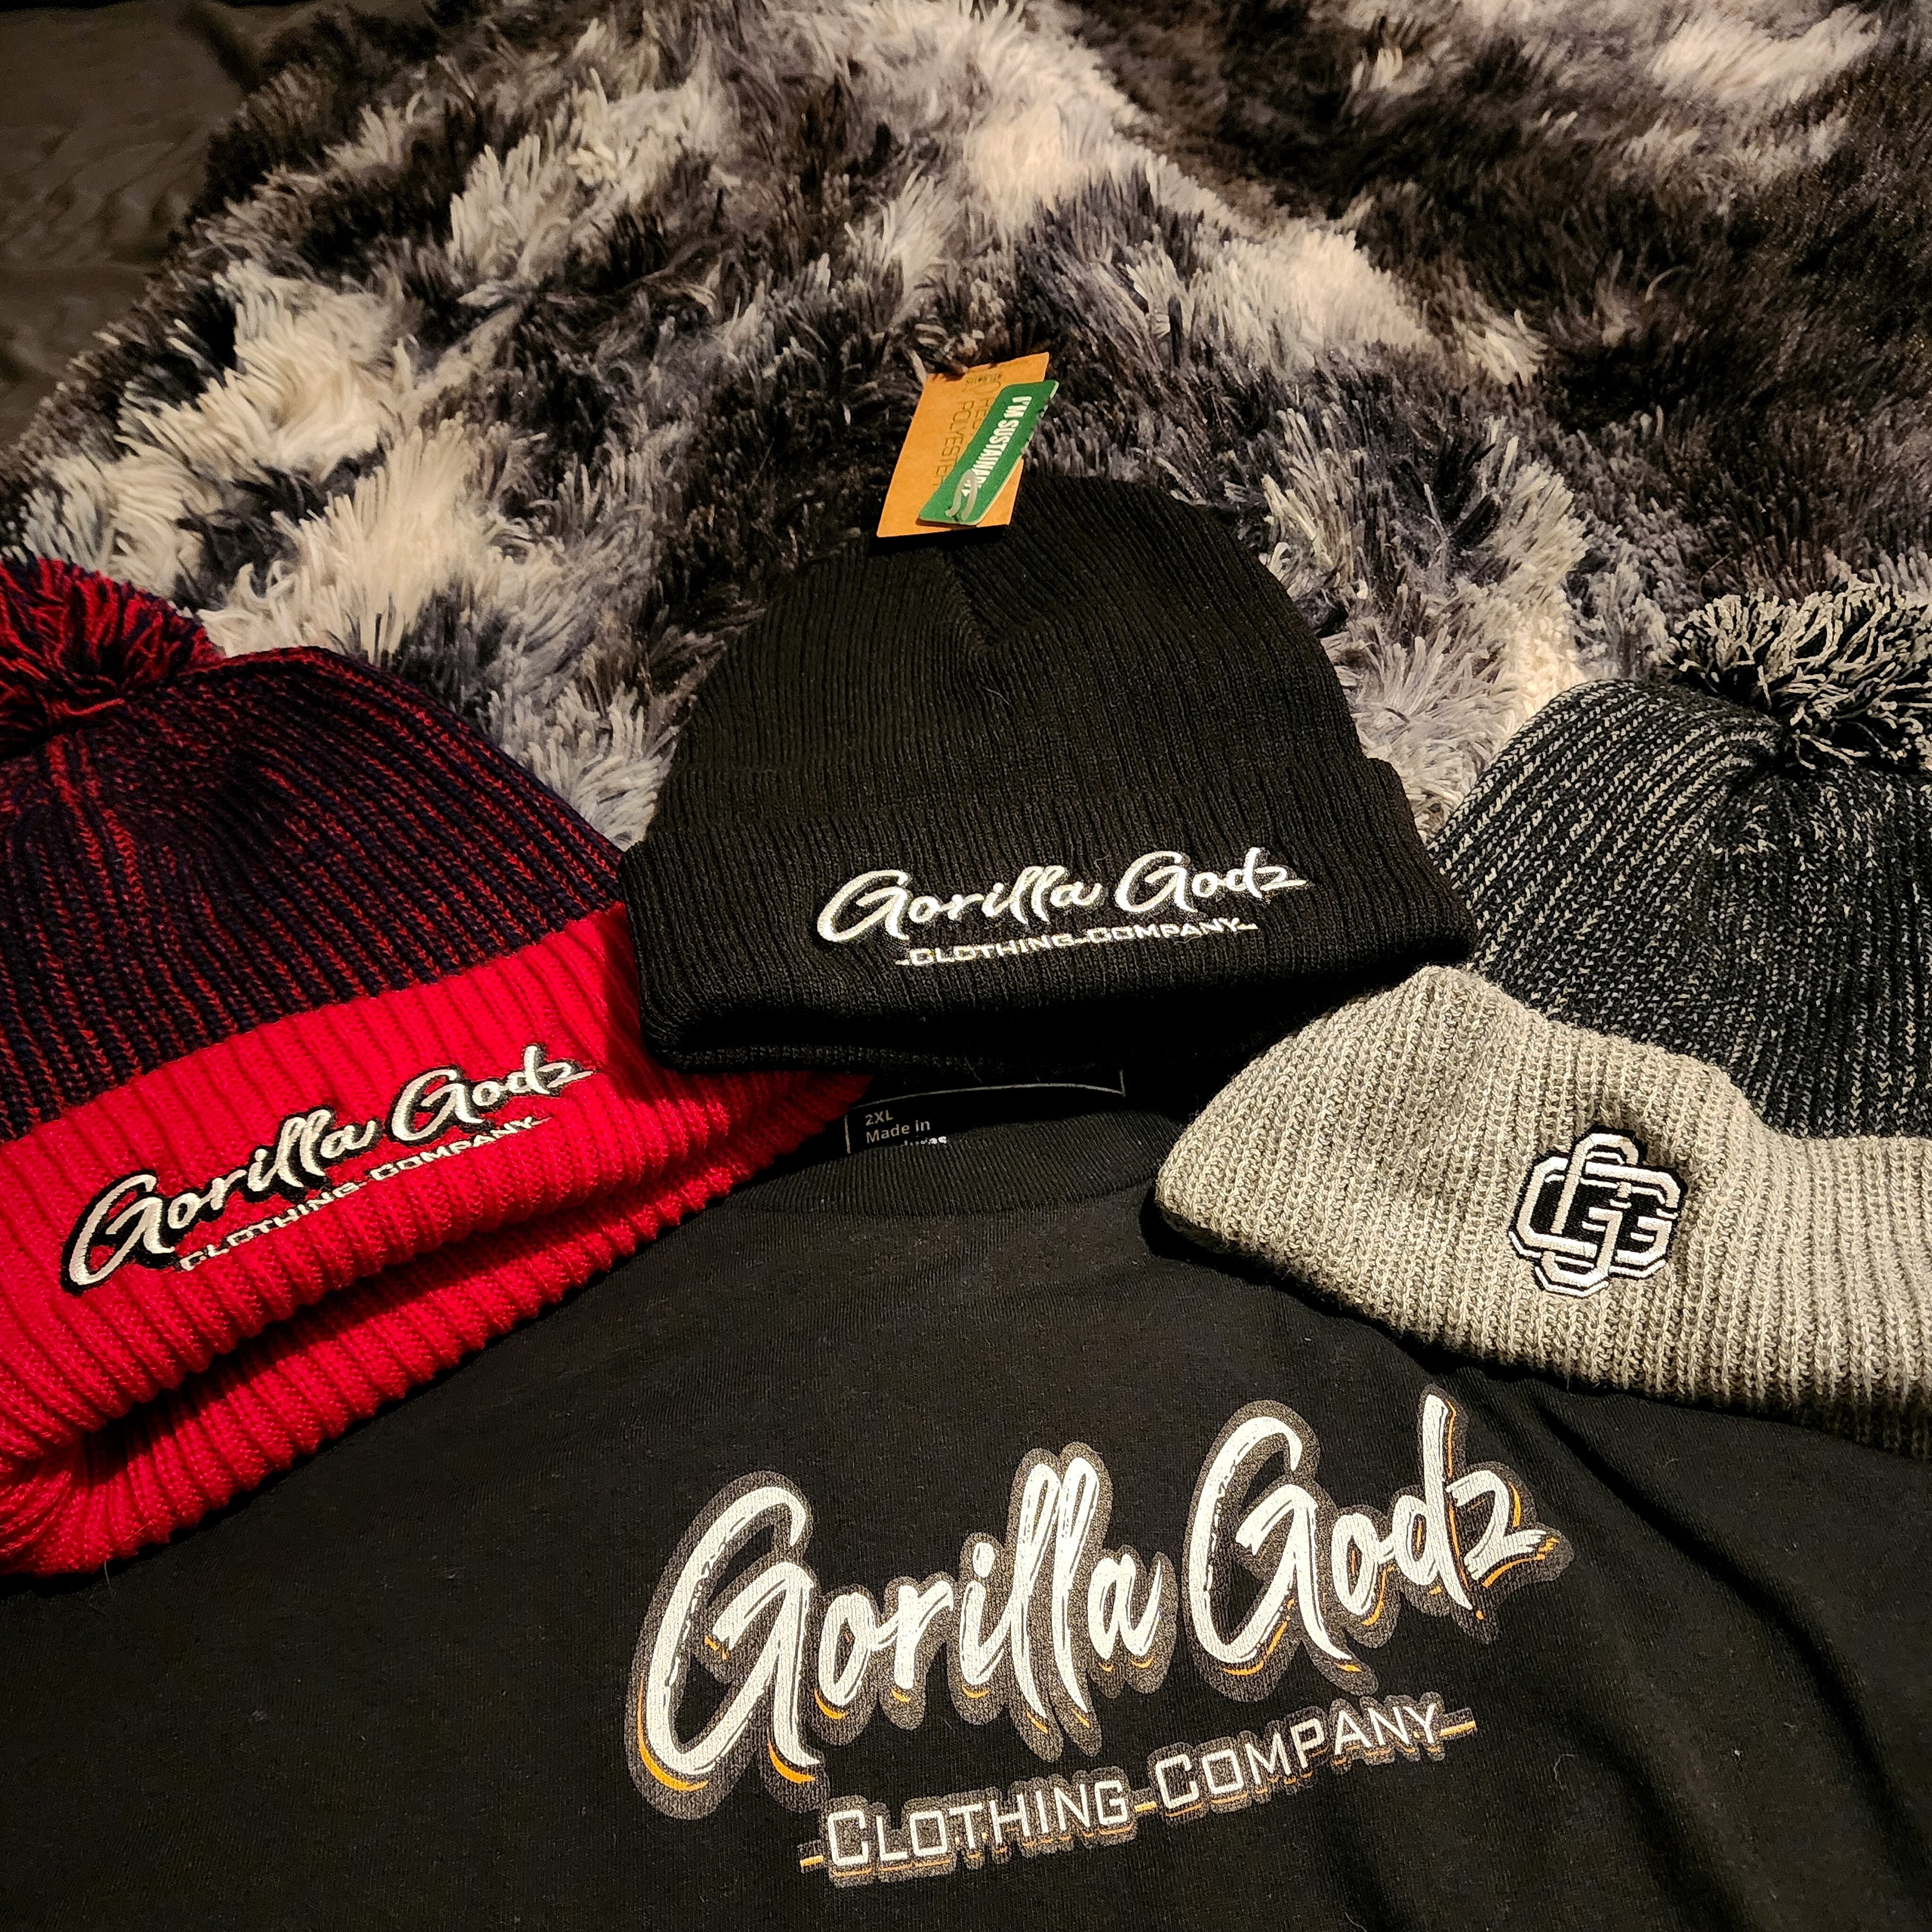 Gorilla Godz Ribbed knit beanie (Color options available)